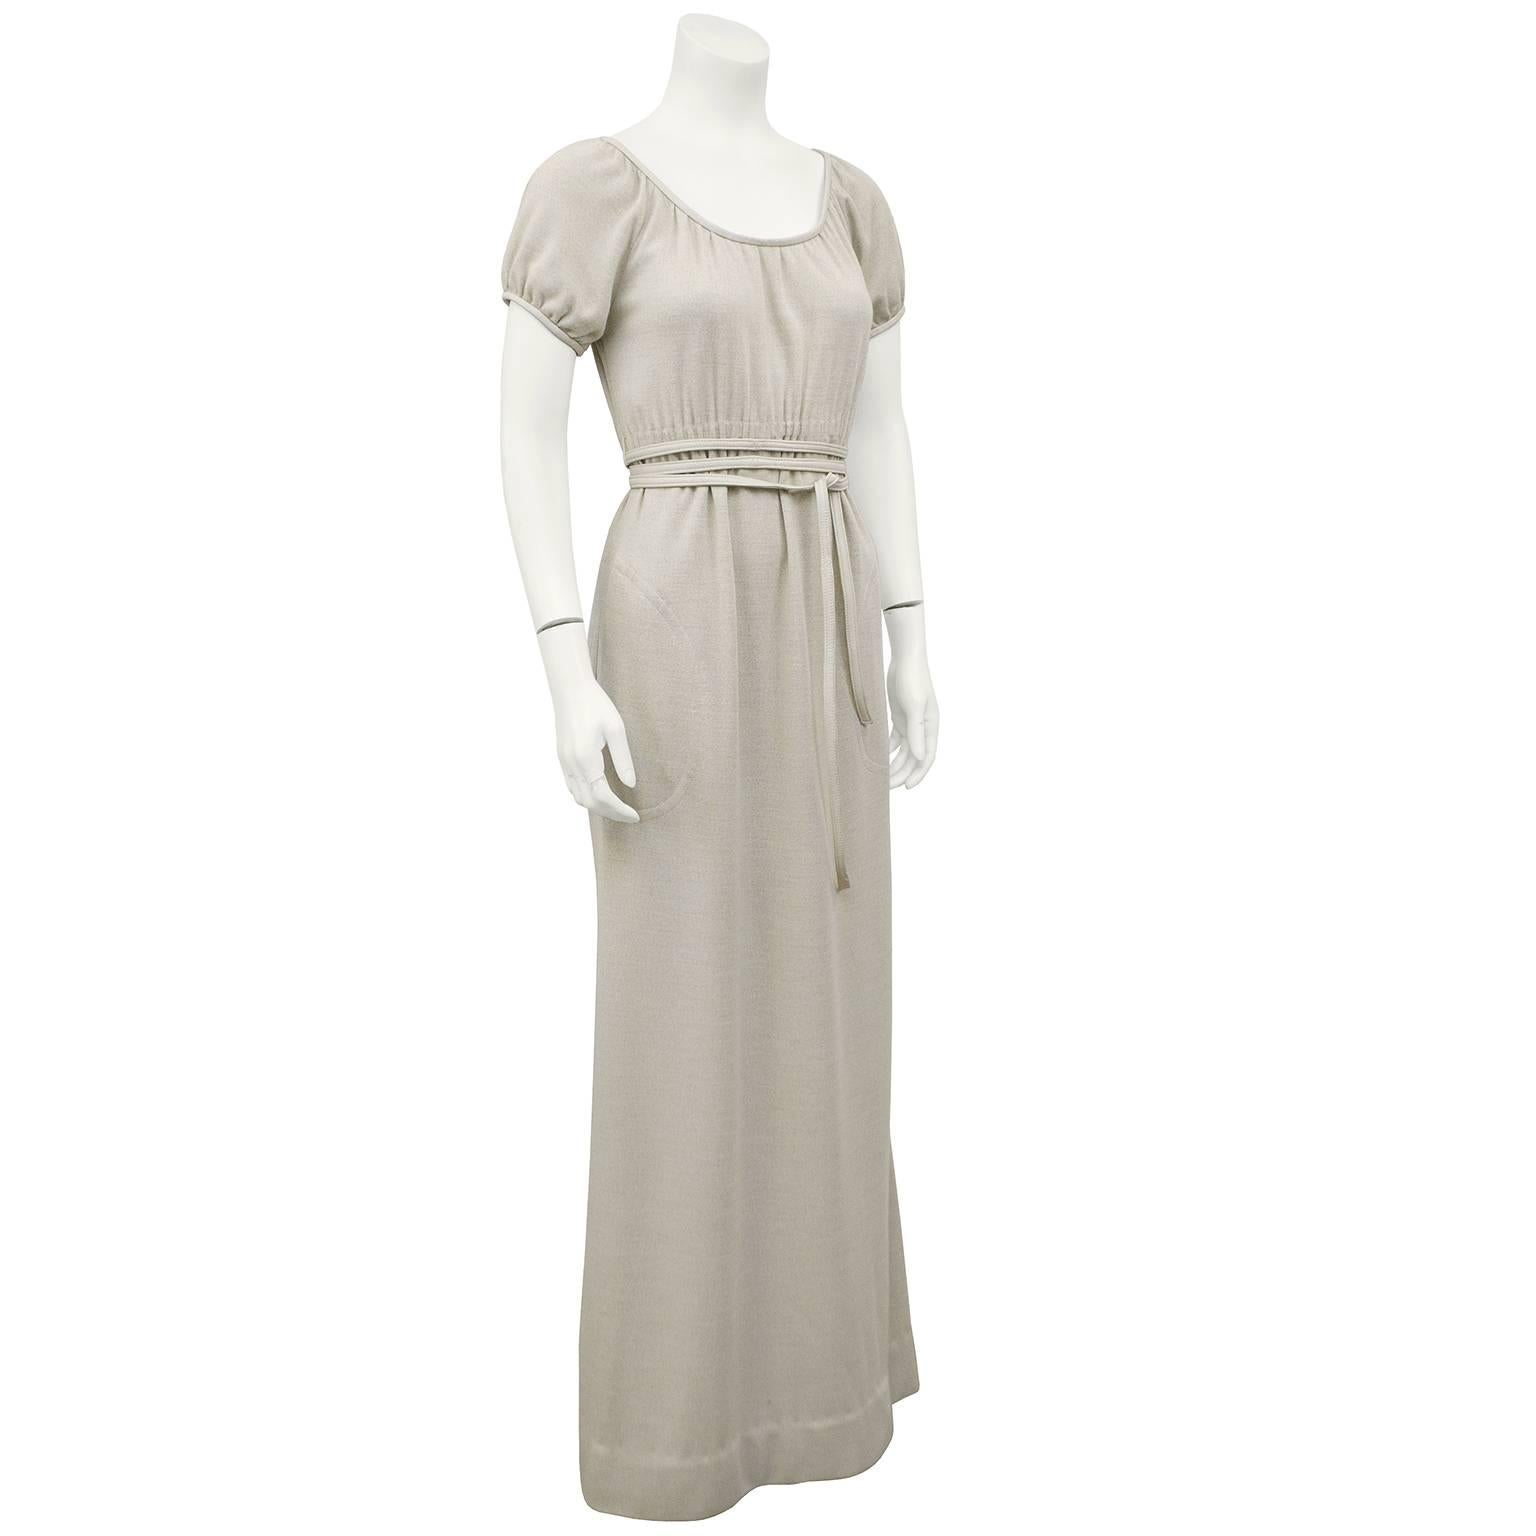 Bonnie Cashin leather trimmed heathered wool jersey gown in cream trimmed in tone on tone leather. The peasant style empire waist gown falls elegantly with some ruching just under the bust and ties with a leather skinny belt. Side slit pockets at